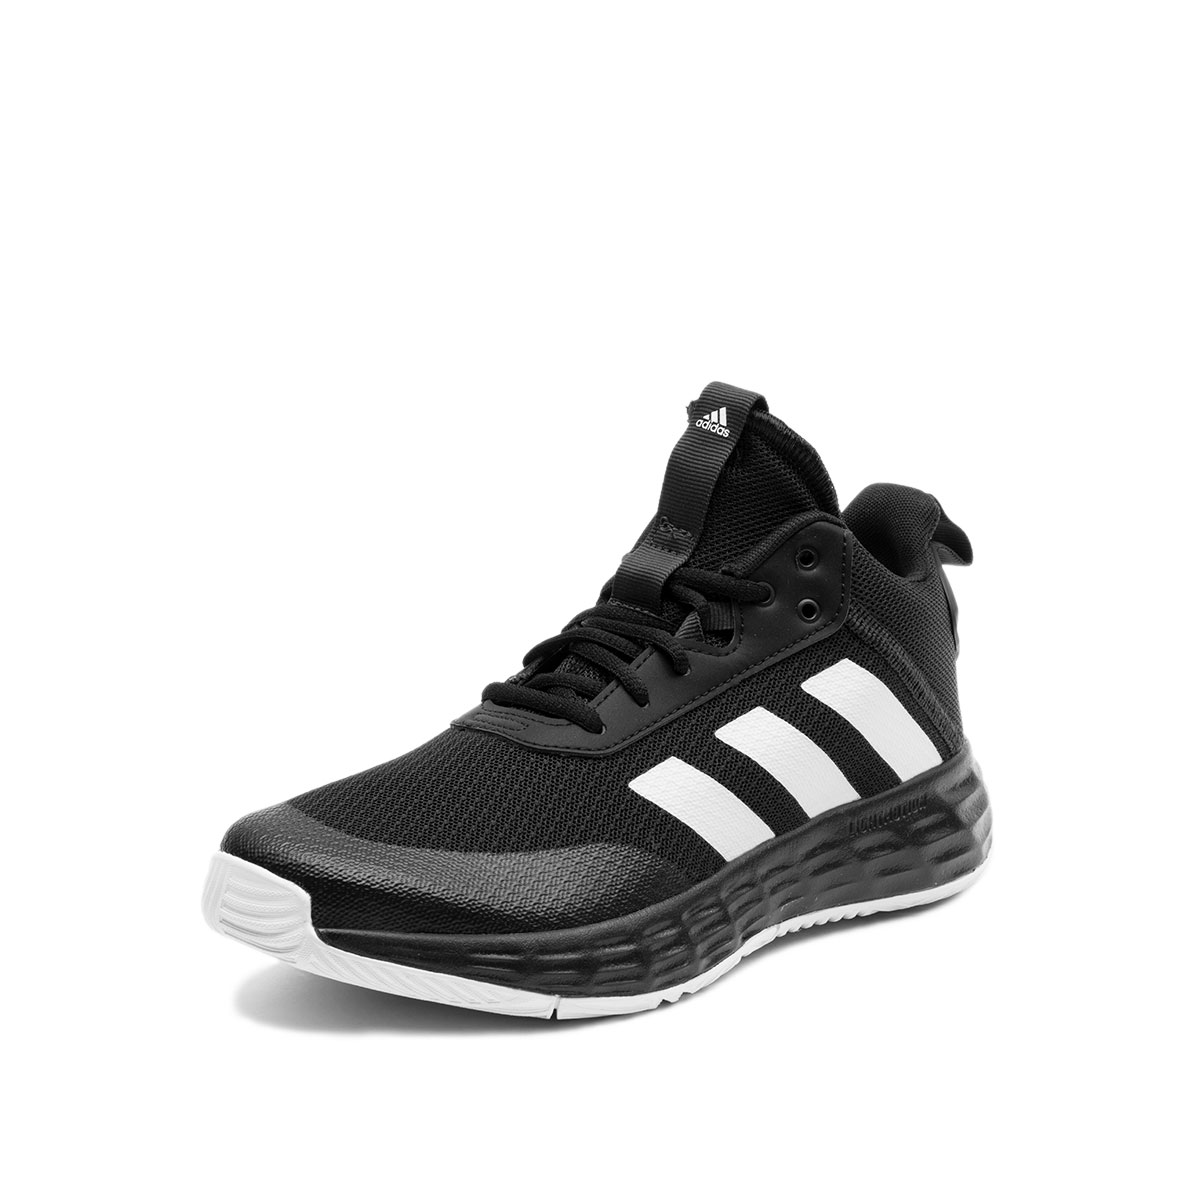 adidas Ownthegame 2.0  H01558